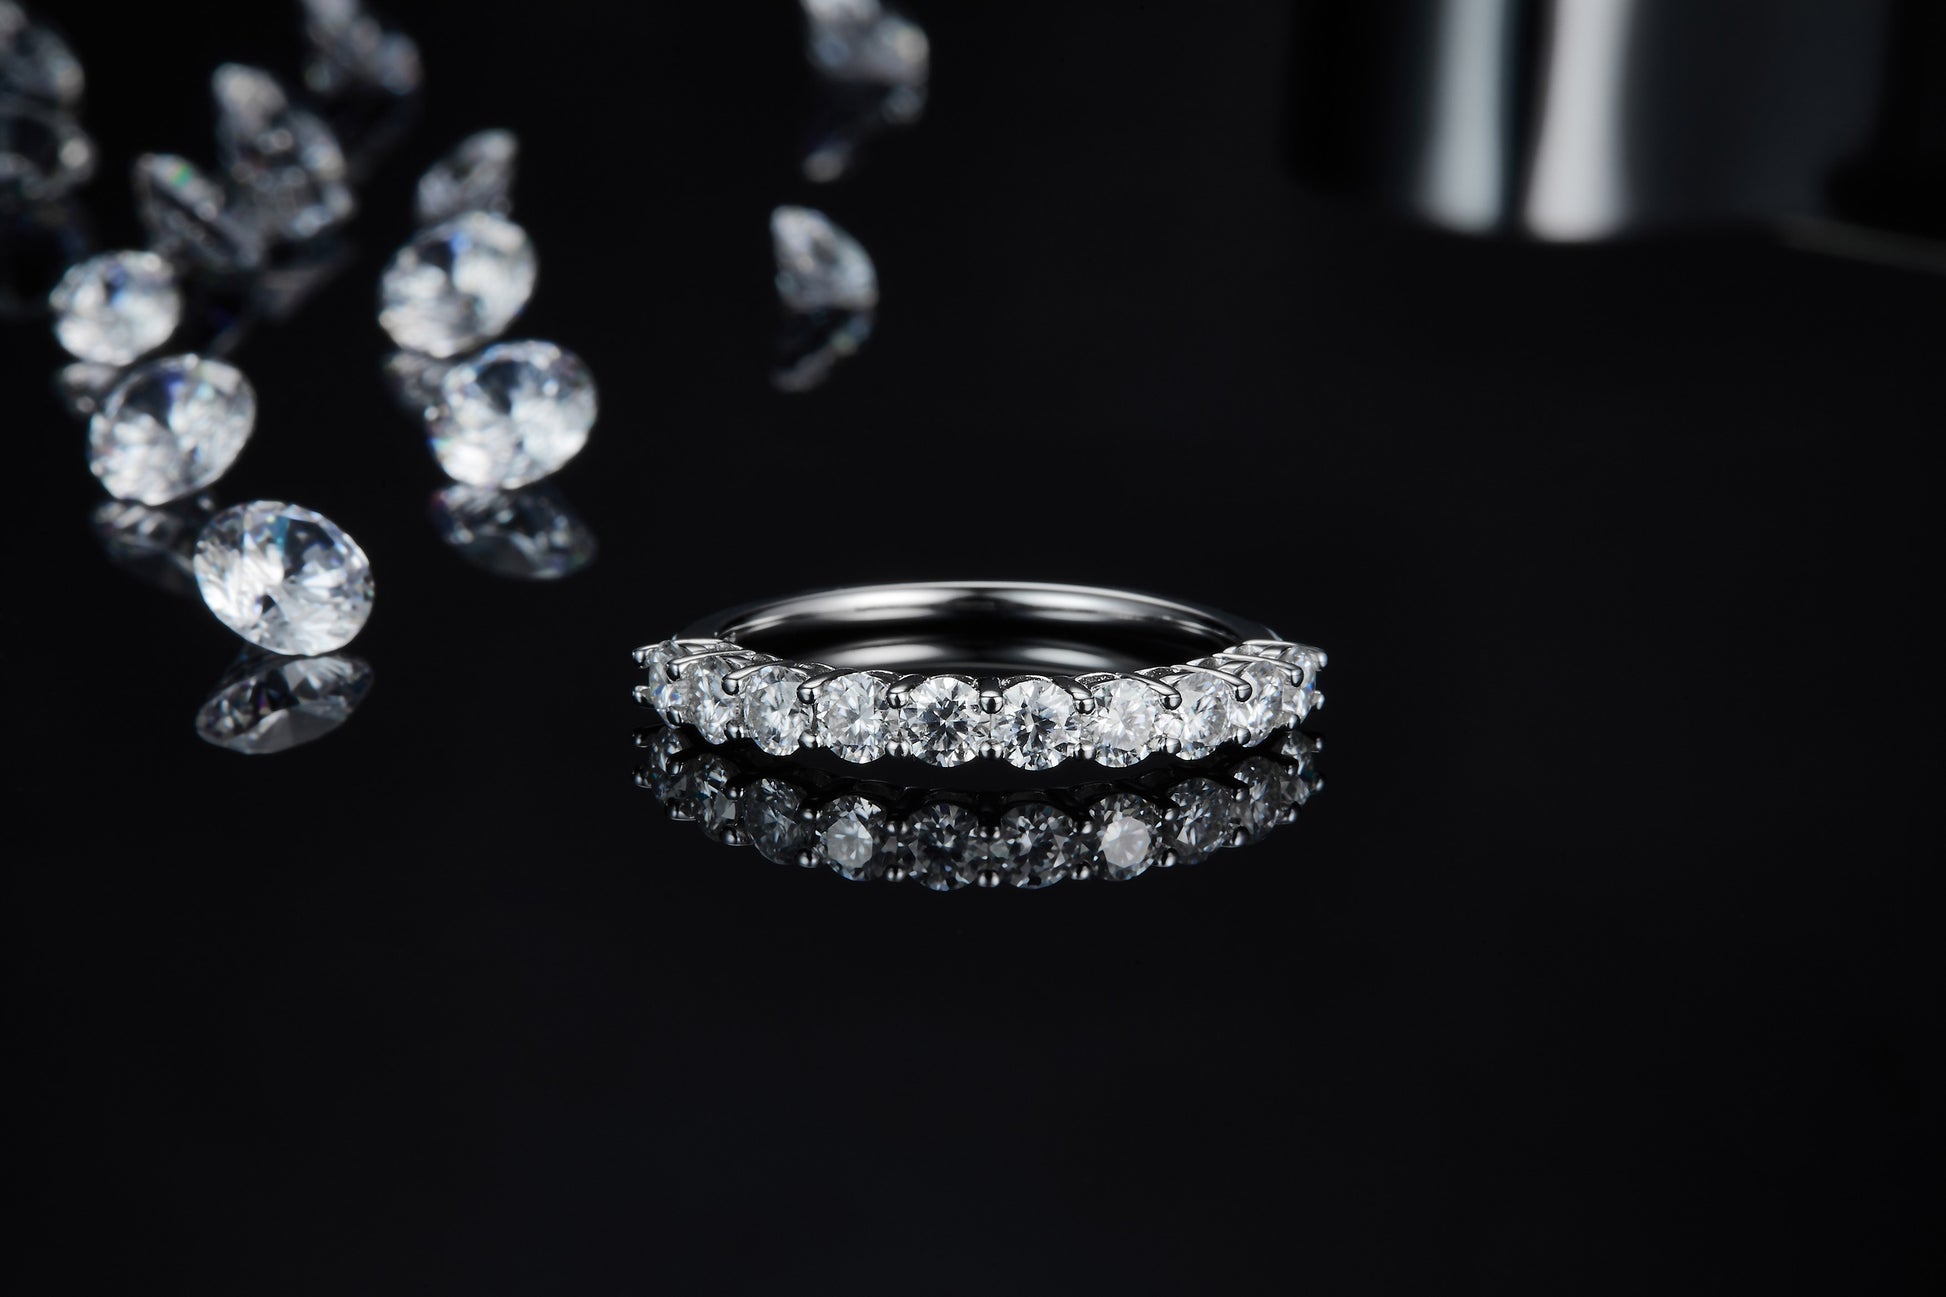 A round cut wedding ring with several small round gems.